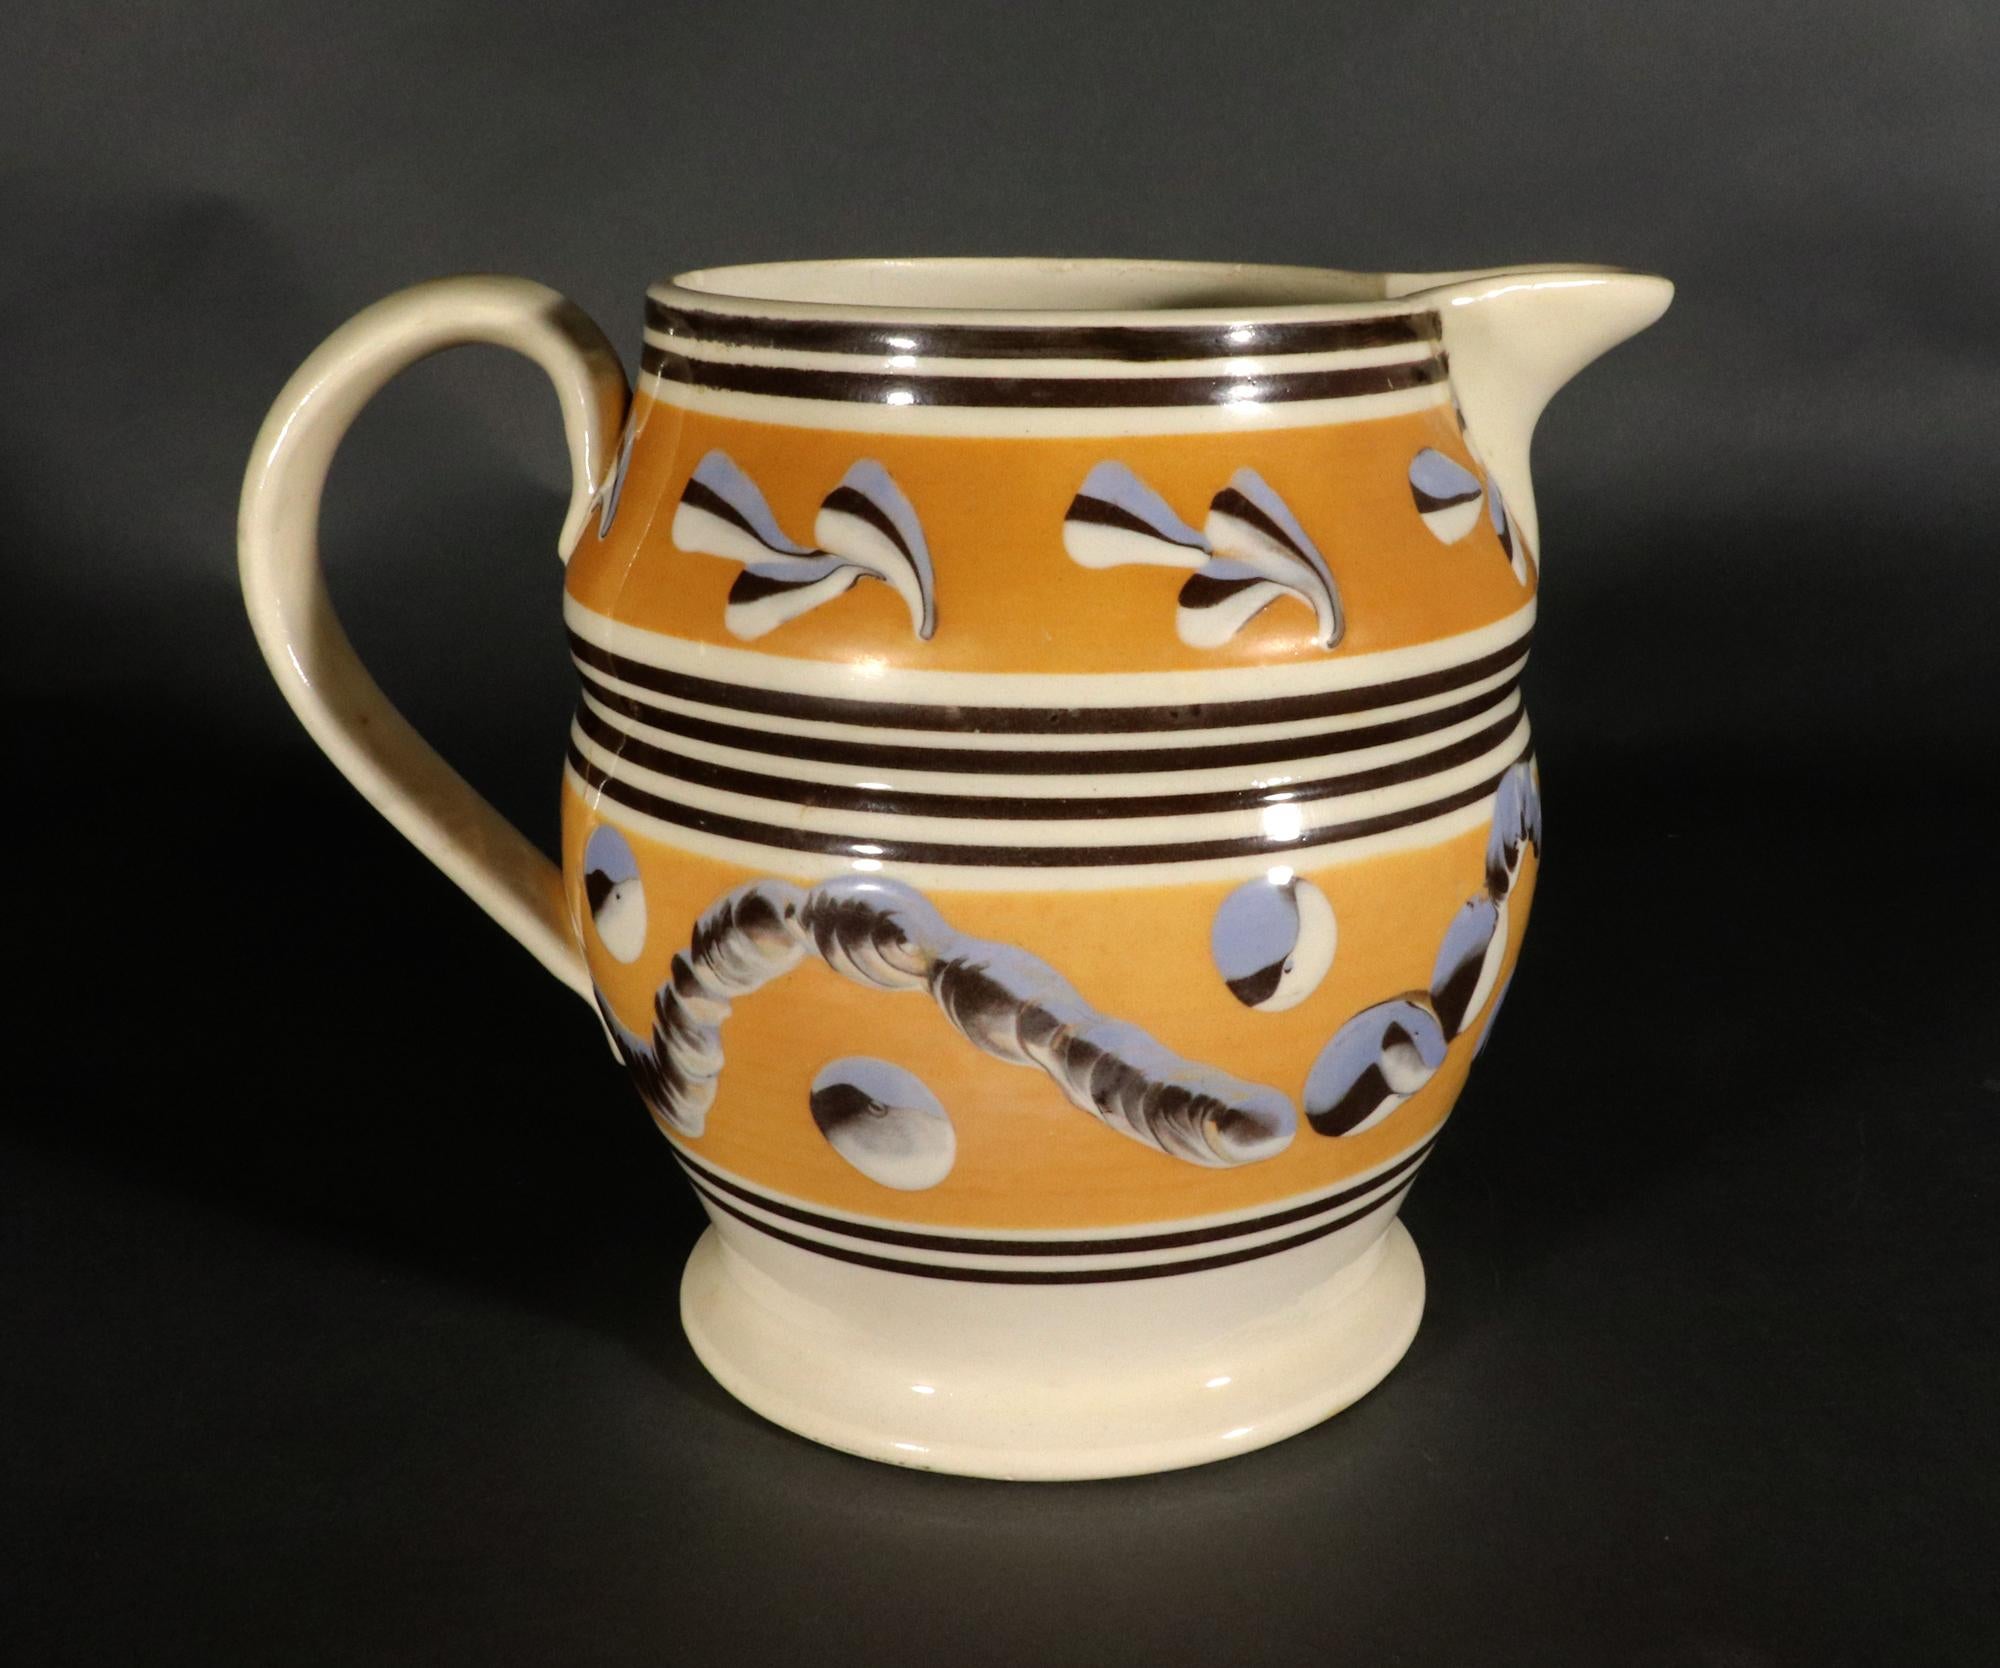 English Pottery Dark Yellow Mocha Jug with Leaf, Earthworm and dot Decoration,
Circa 1800

The jug has a loop handle and pinched spout.  There are two dark yellow bands around the body, the lower one with a tri-color wavy chain band and with